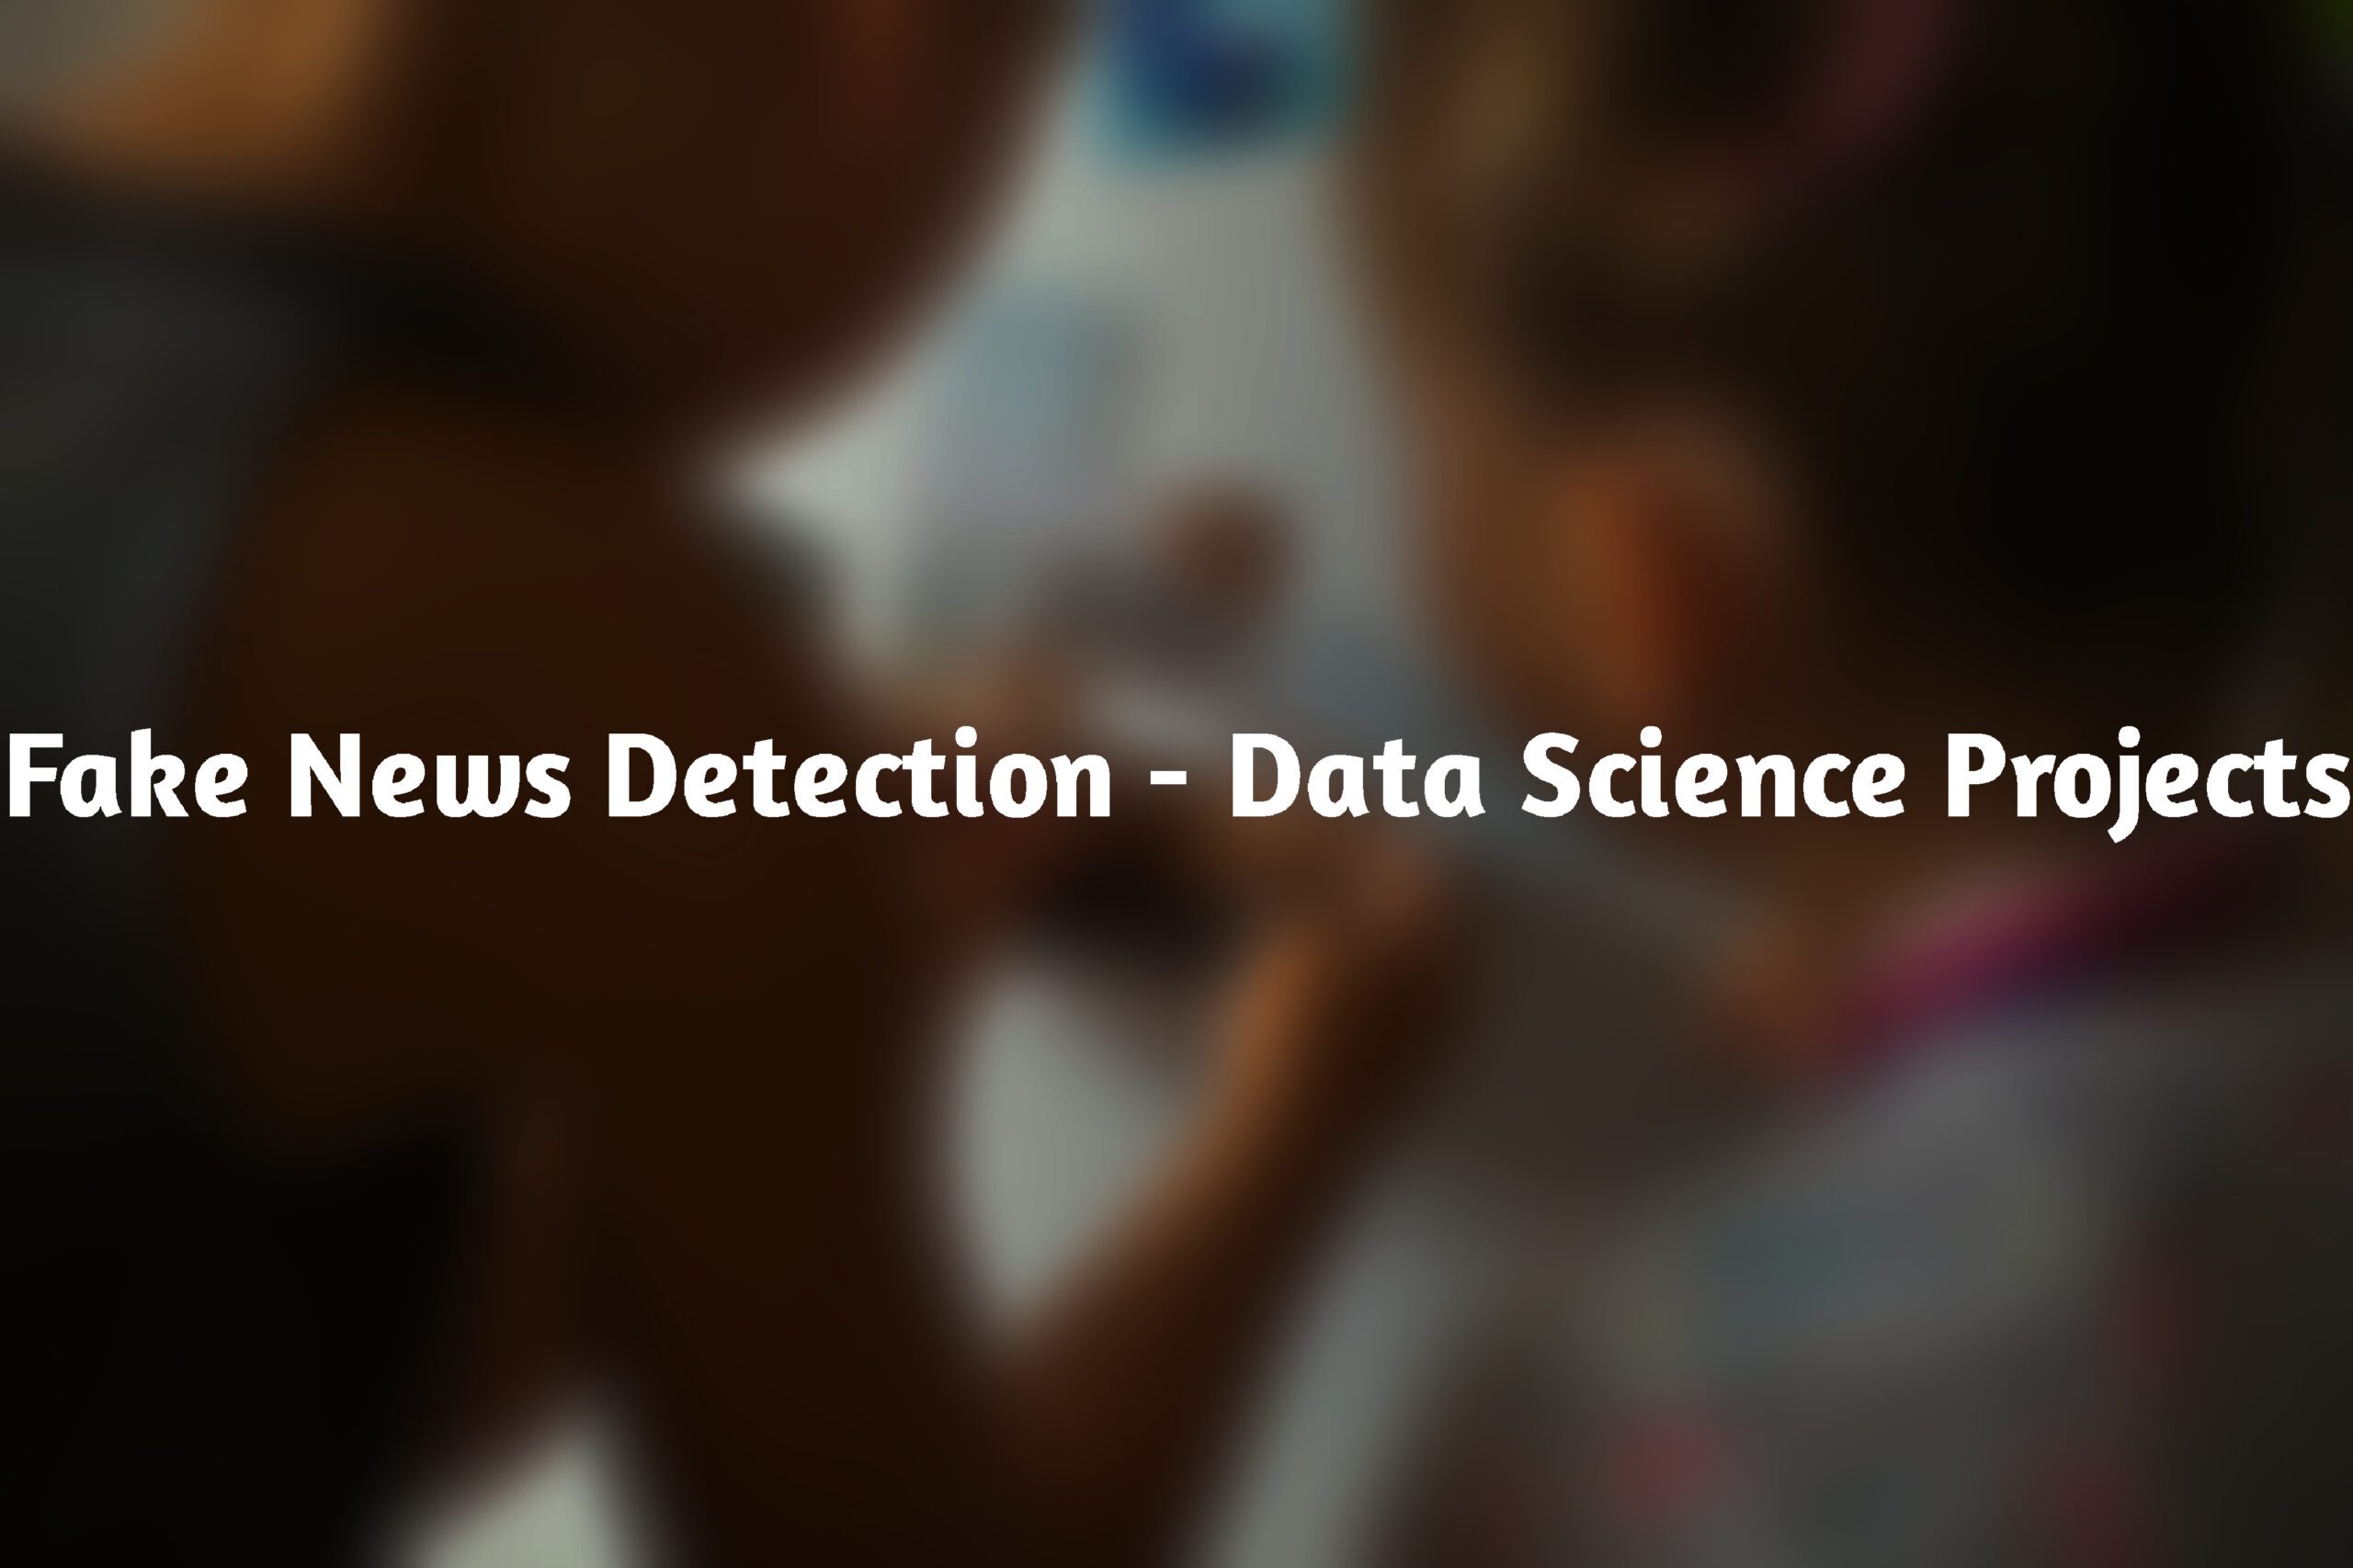 Fake News Detection - Data Science Projects